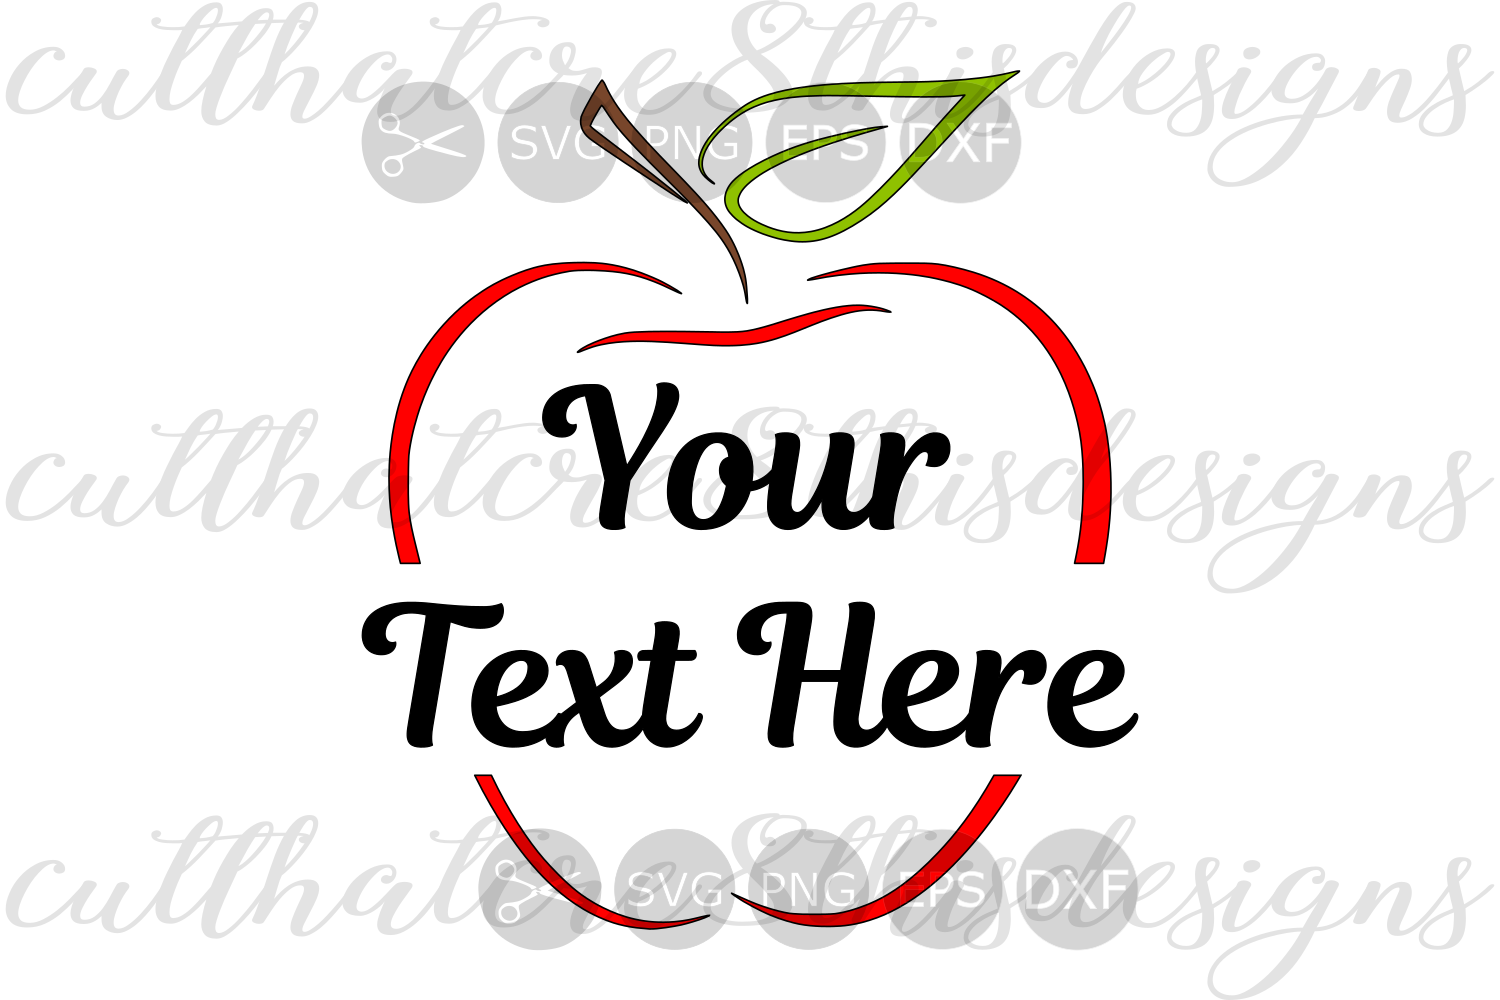 Download Apple, Custom, Your Text Here, Teacher, School, Quotes, Sayings, Cut File, SVG, PNG, EPS, DXF ...